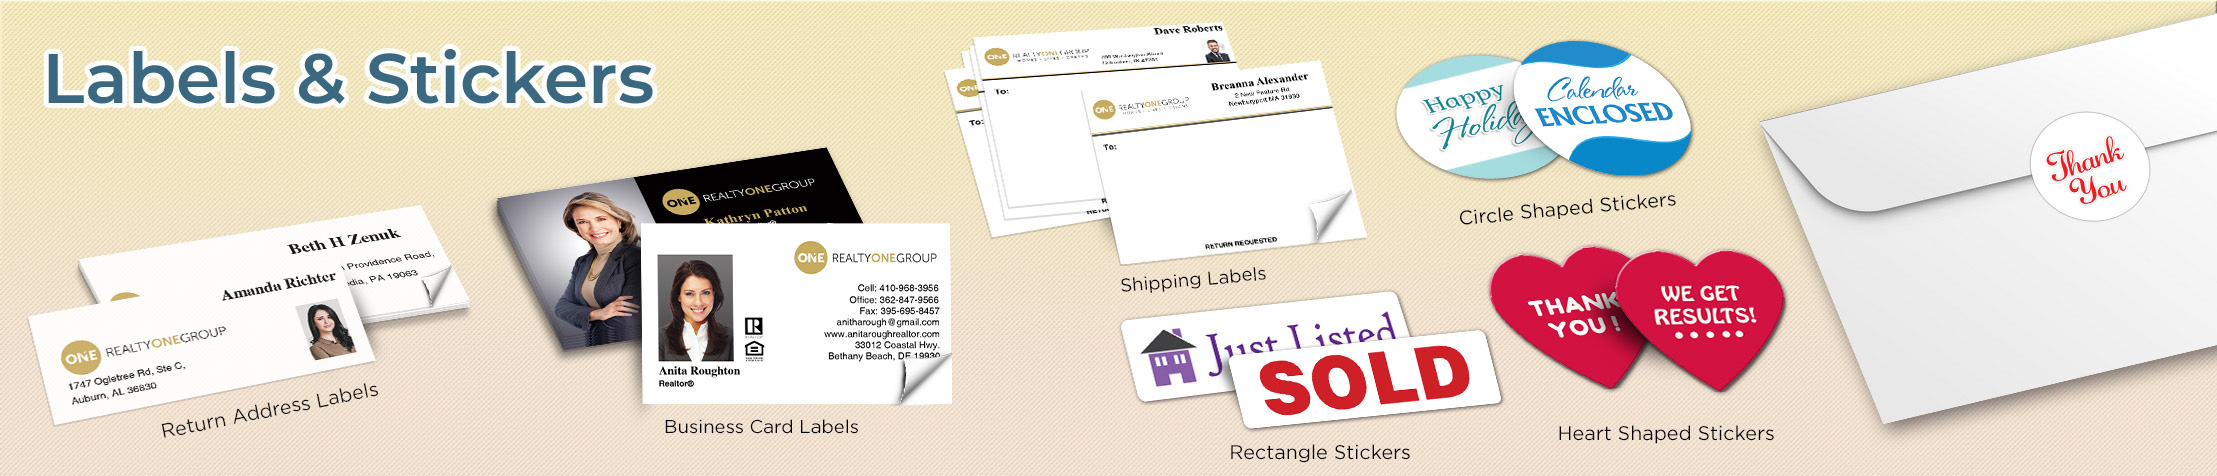 Realty One Group Real Estate Labels and Stickers - Realty One Group  business card labels, return address labels, shipping labels, and assorted stickers | BestPrintBuy.com